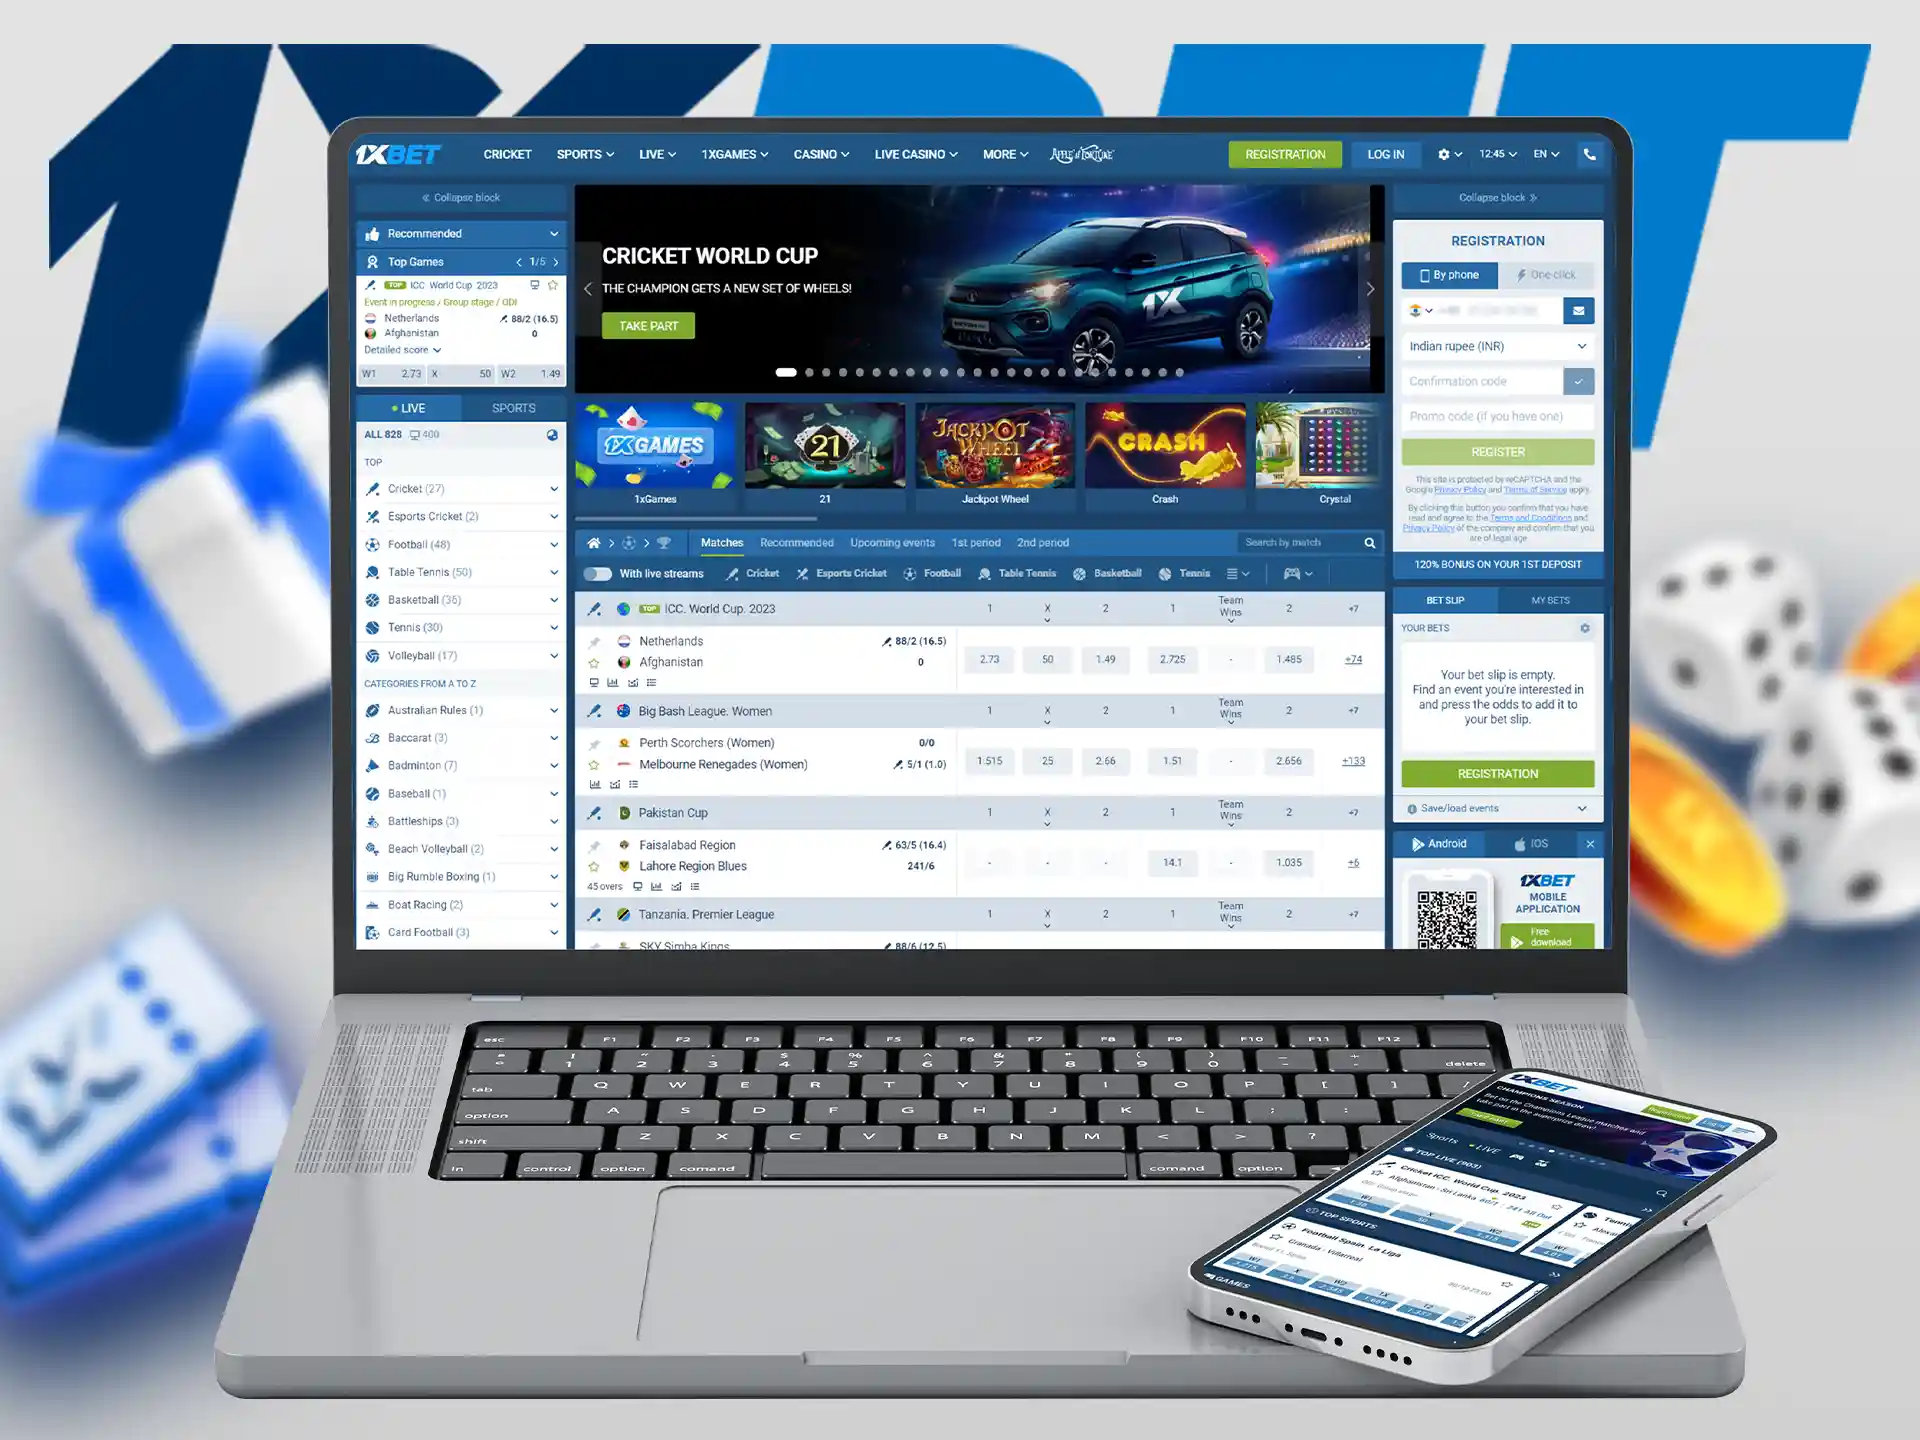 1xbet casino is a great and easy-to-use option for online gambling.